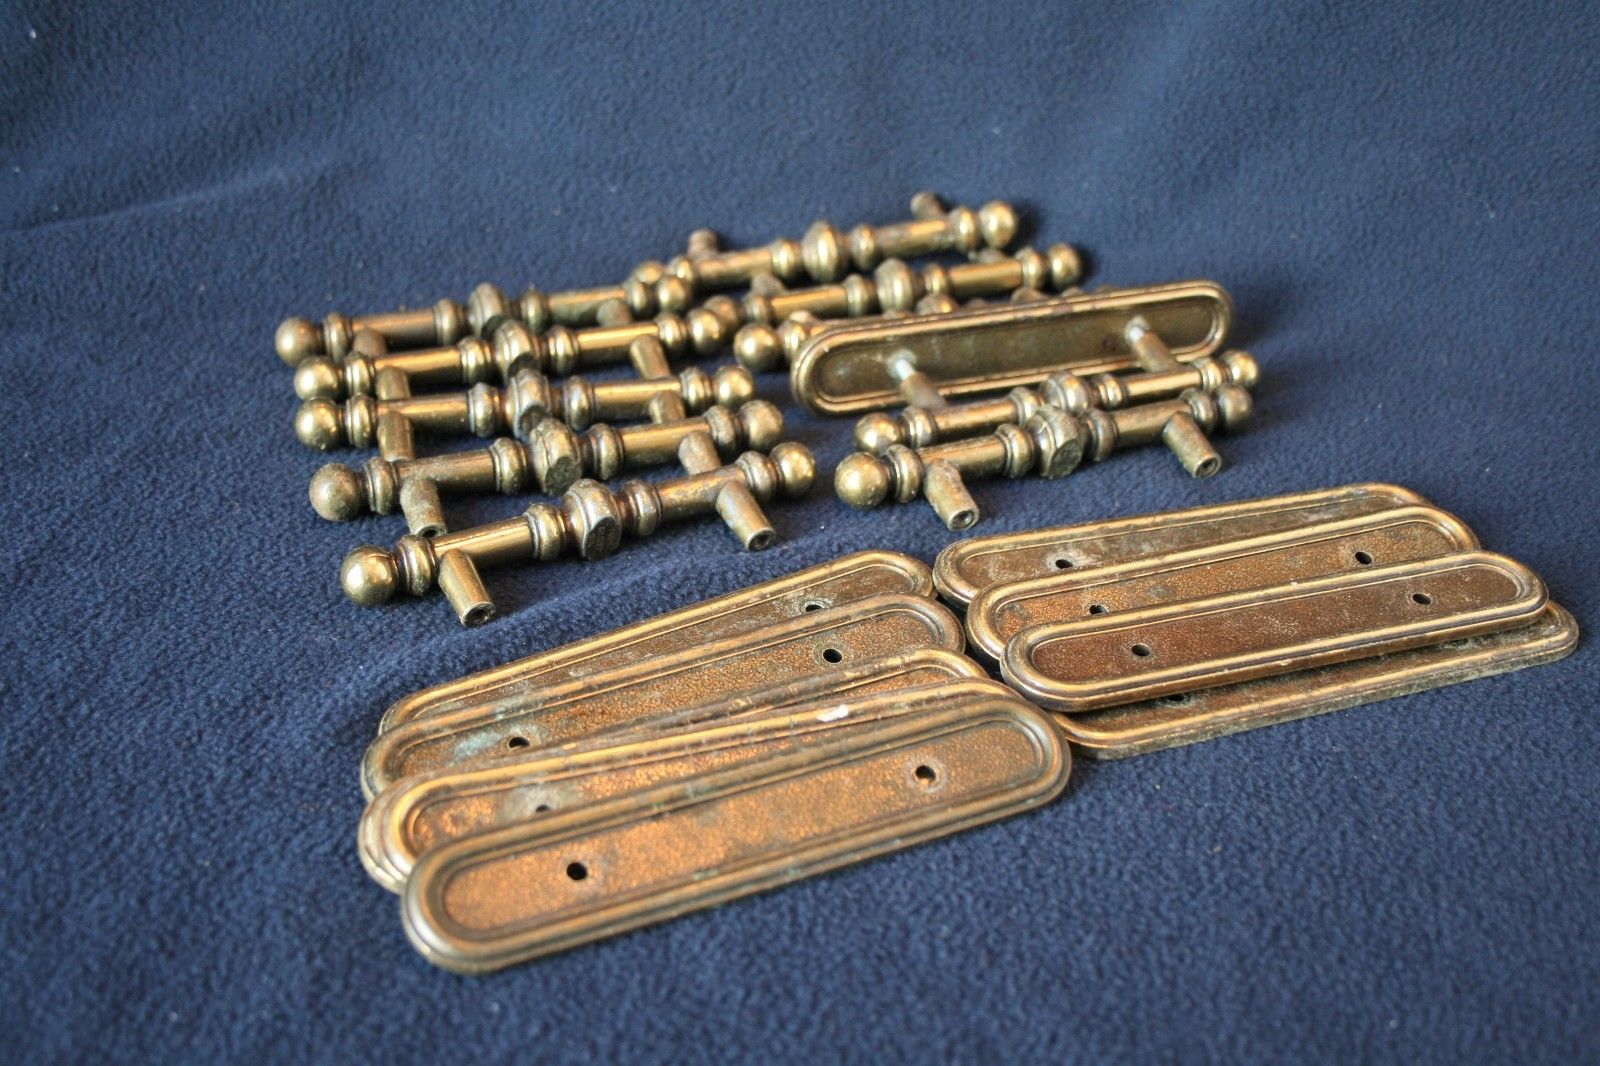 Vintage Brass Drawer Pulls and Back Plates Lot of 10, 3"OC 1977 Made in Canada